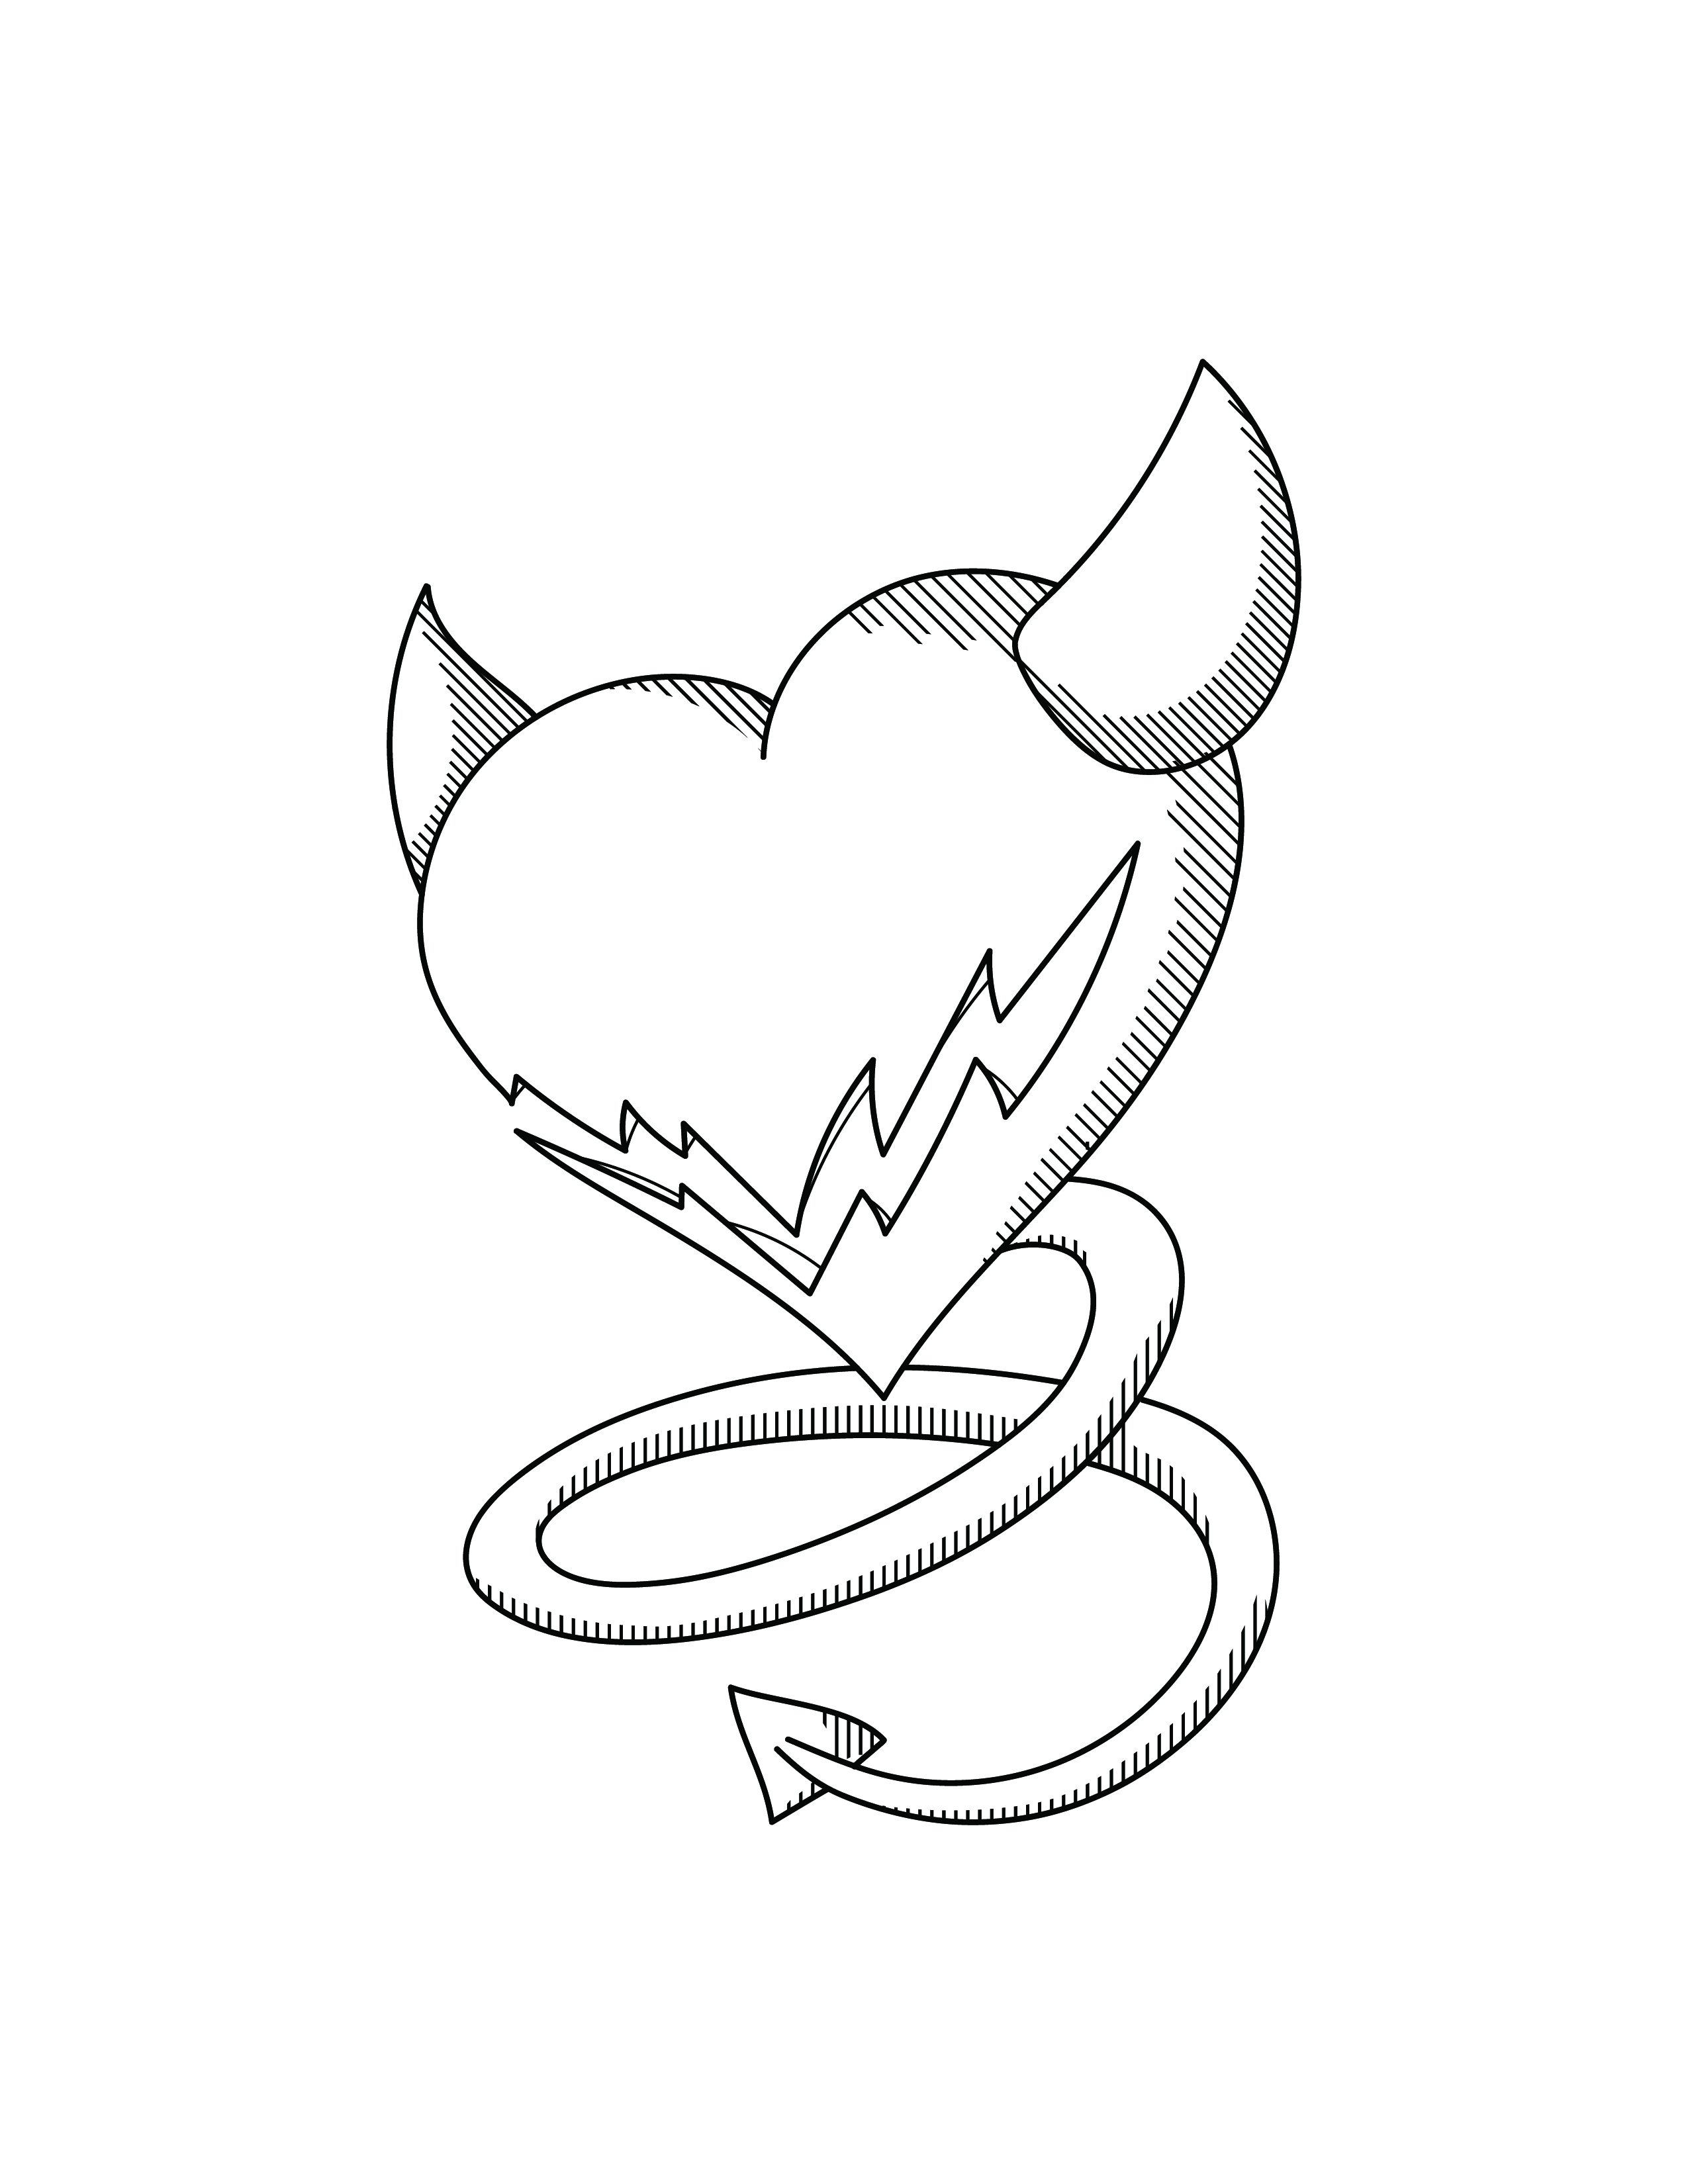 Broken Heart Coloring Pages For Adults